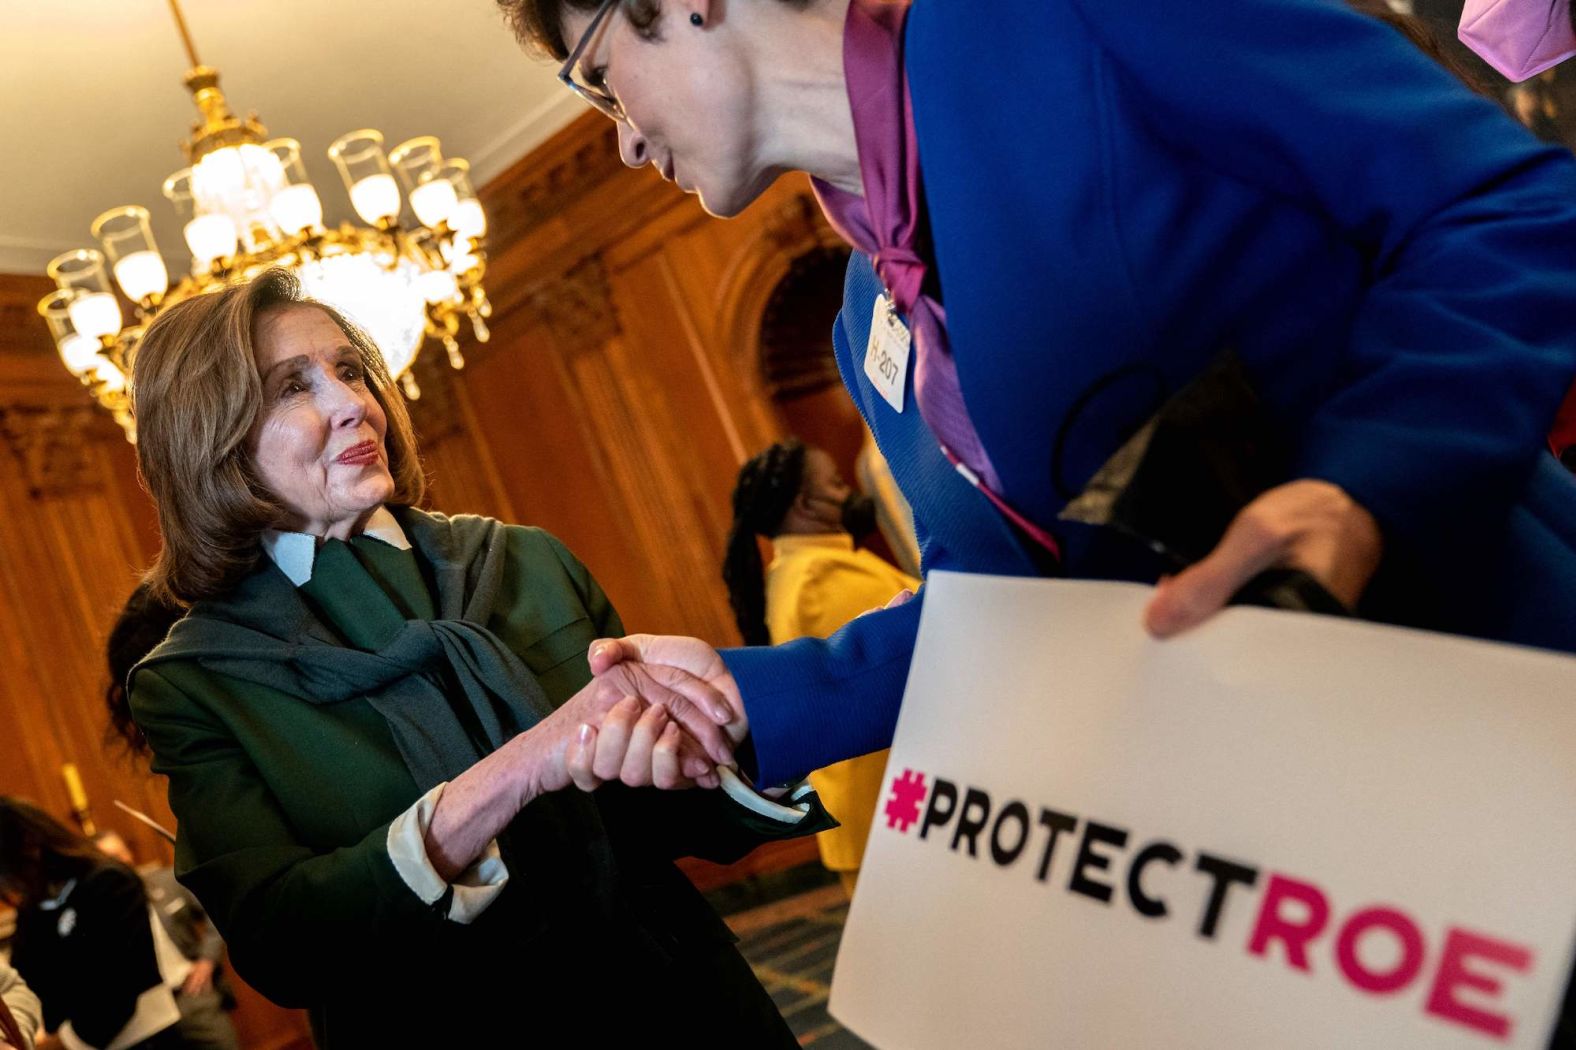 Pelosi shakes hands with a pro-choice advocate prior to a press conference about the leaked Supreme Court draft decision on Roe v. Wade in May 2022.